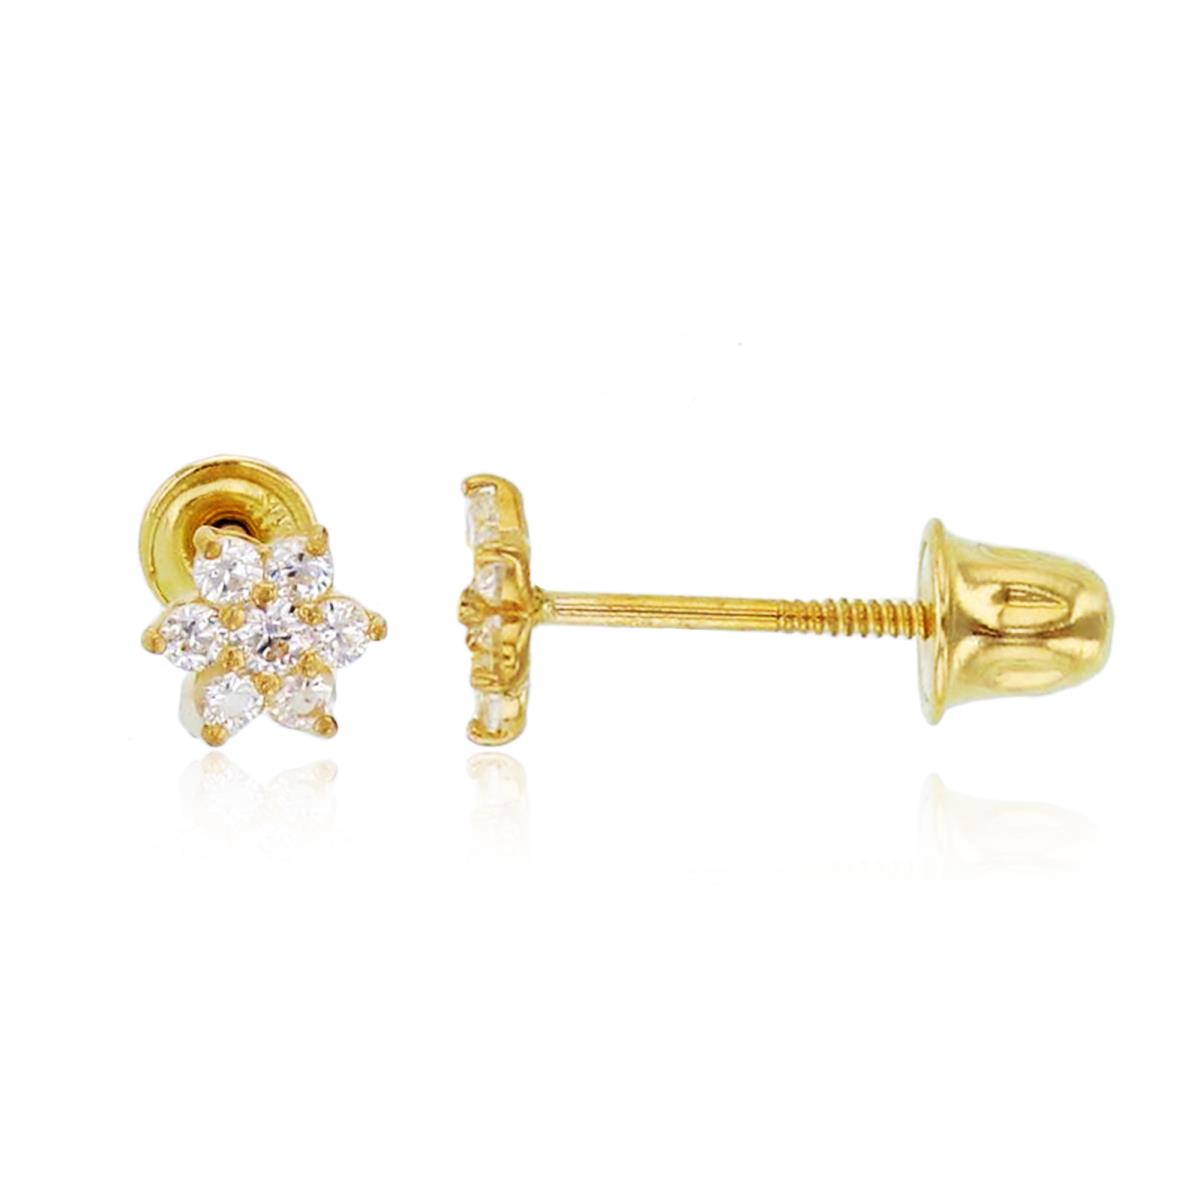 10K Yellow Gold Rnd White CZ Small Flower 5mm  Studs with Screw Backs